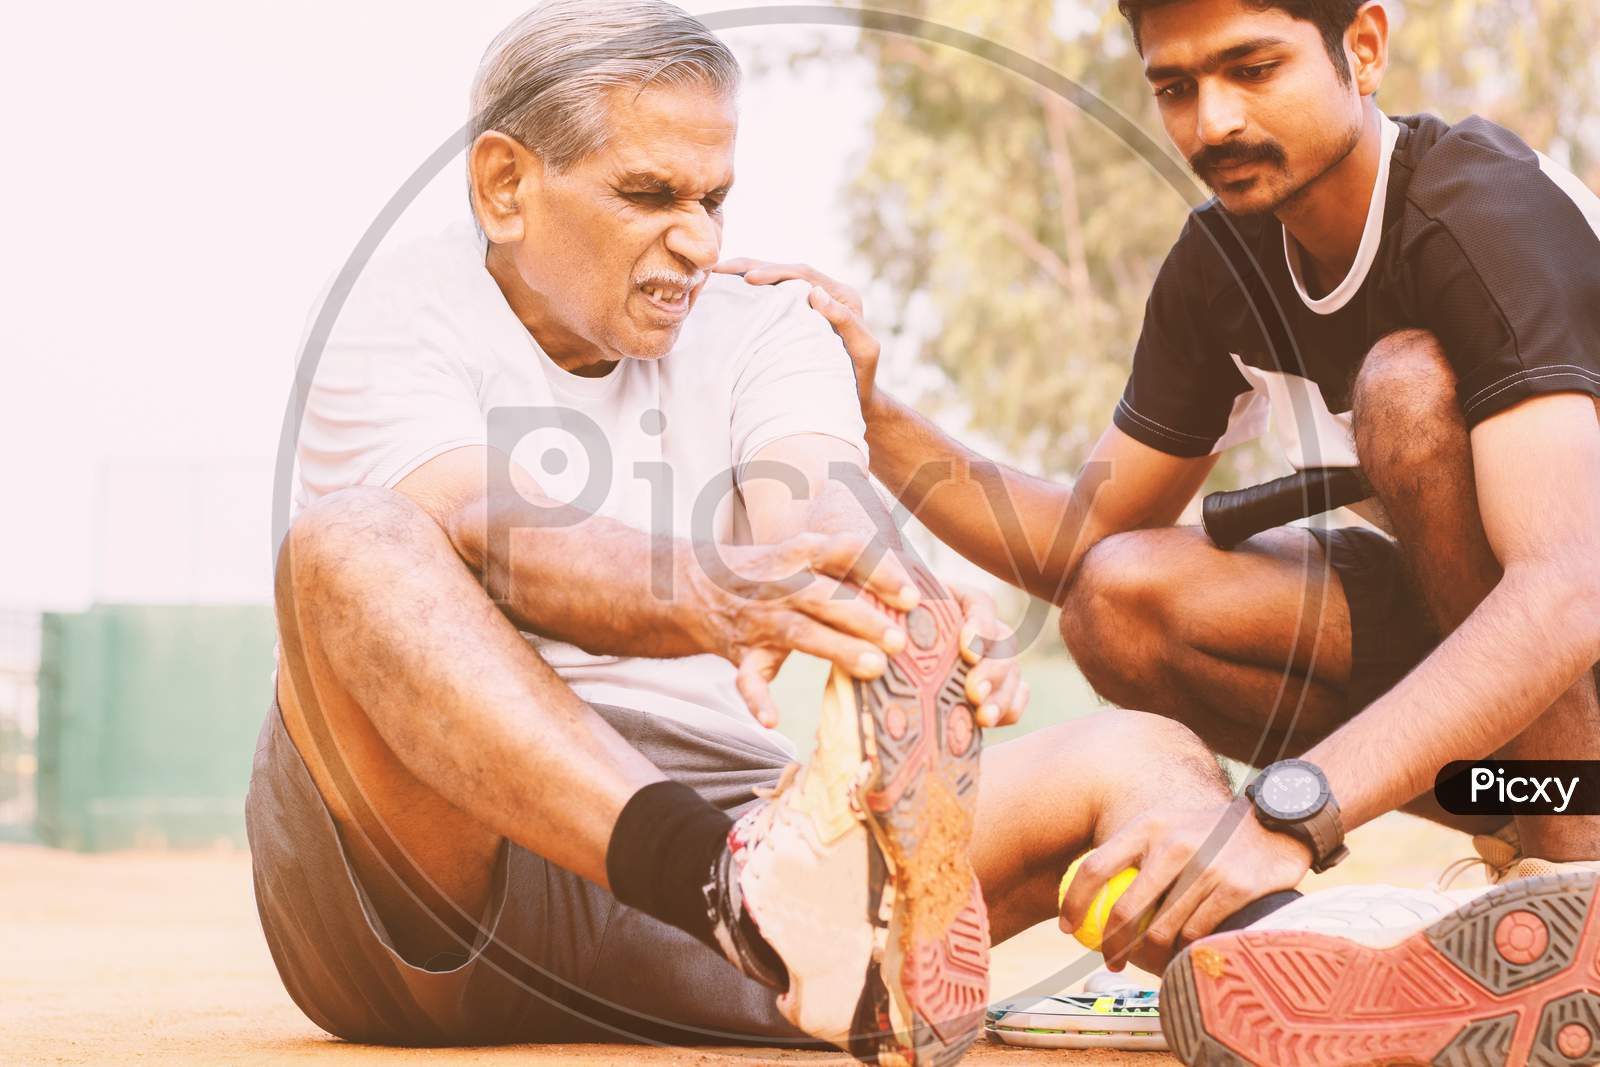 Elderly Holding His Toe Suffering From Pain And Young Man Or Teammate Helping Him At Tennis Court - Concept Of Old People Fitness And Injury - Young People Helping Senior Citizens At Sports.